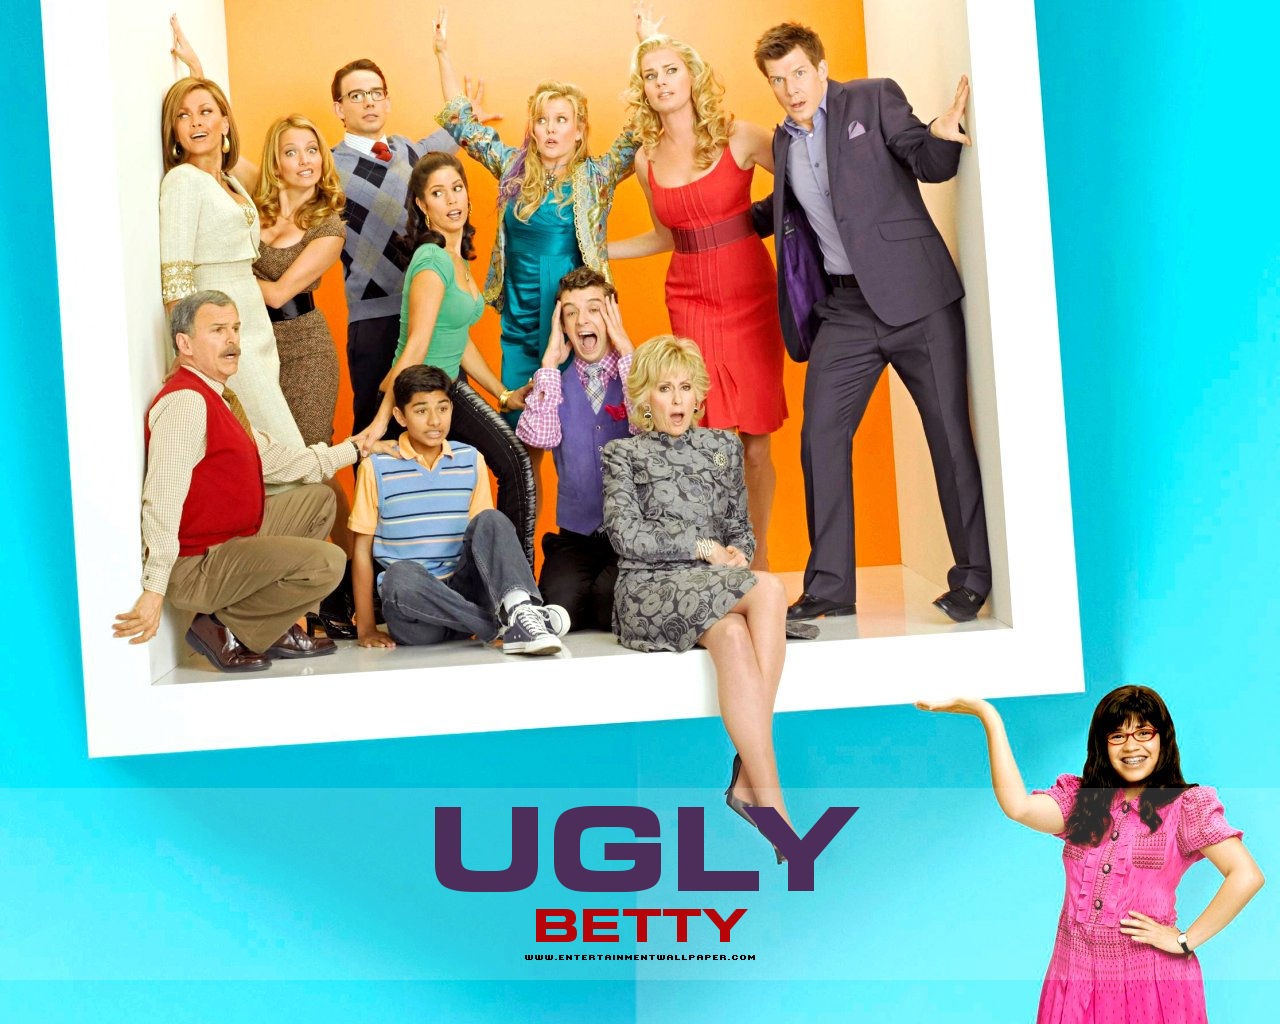 Ugly Betty Tapete #5 - 1280x1024